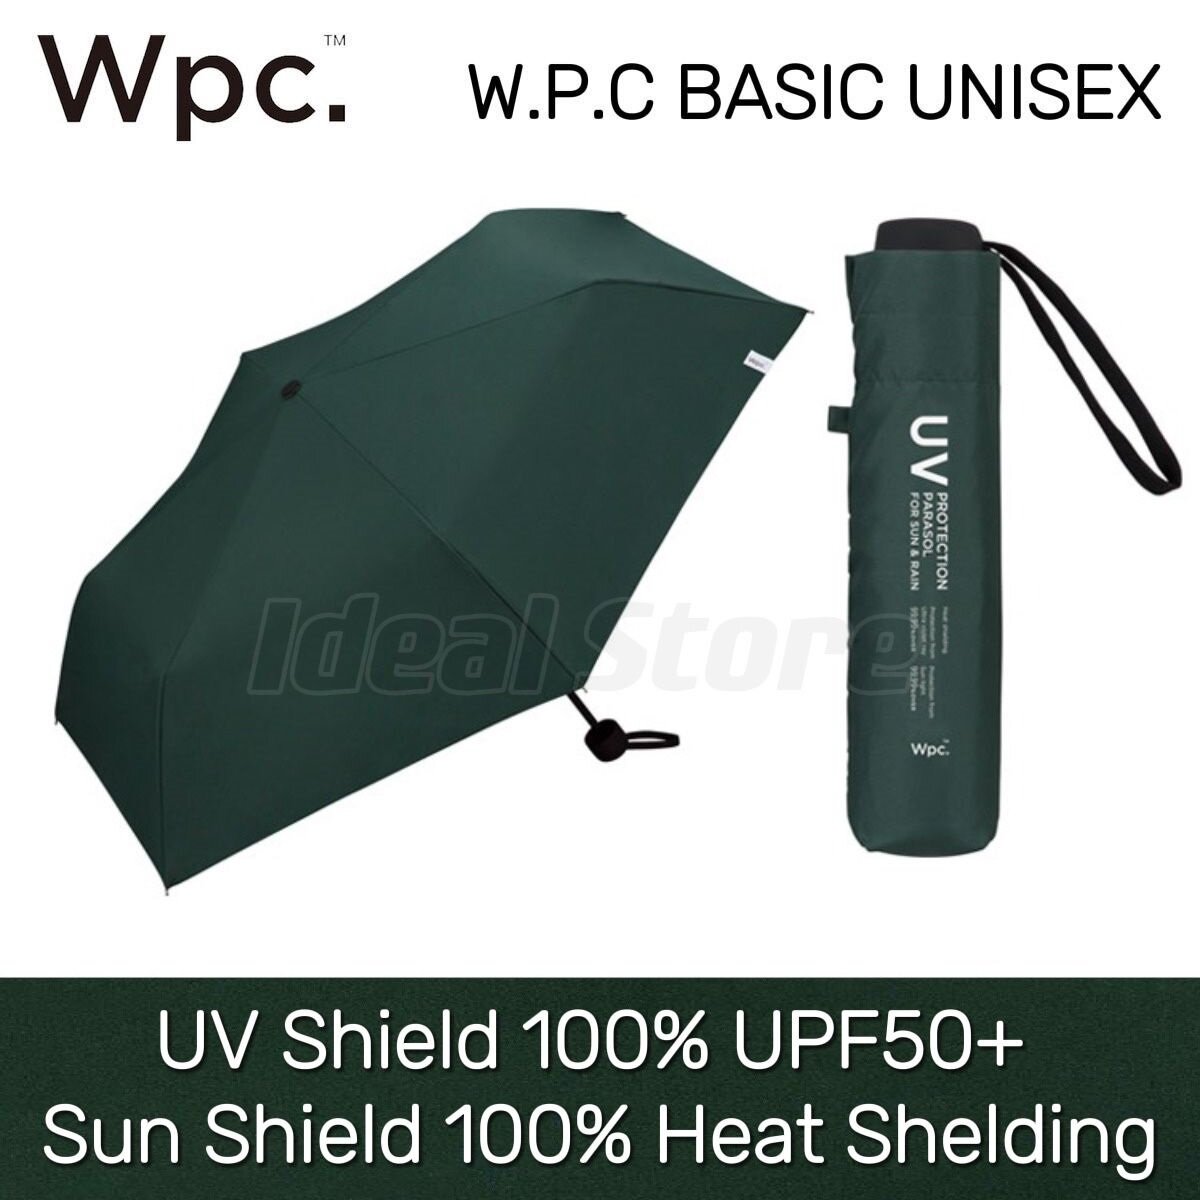 WPC - UV Protection PARASOL Heat-proof and UV-proof foldable umbrella for rain or shine (801-9236) | WPC | BASIC UNISEX | Rain or shine umbrella | Shrinkable umbrella | Anti-UV | Anti-UV | Sun protection - Green